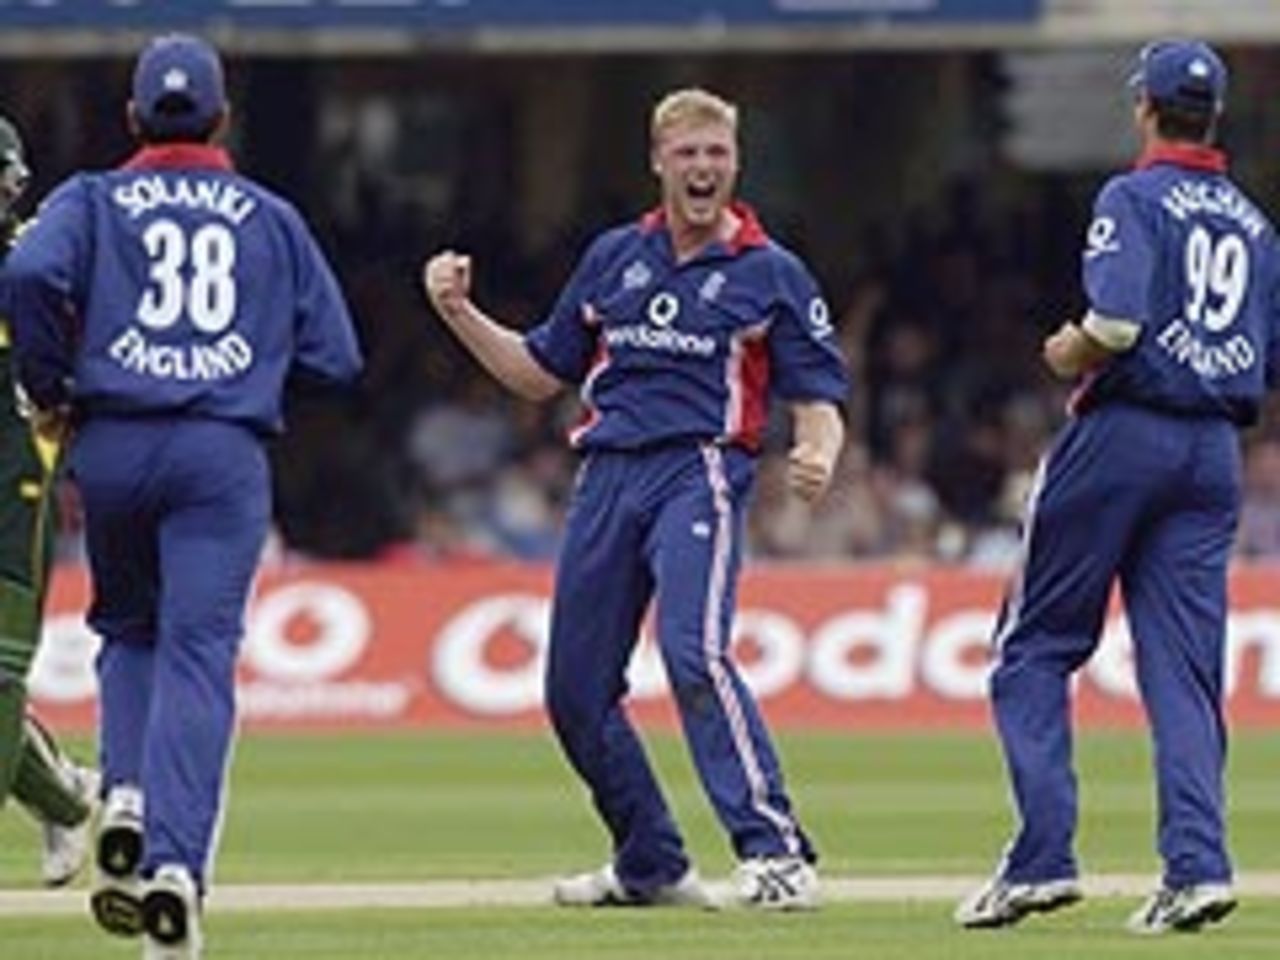 Centre of attention: Andrew Flintoff takes 4 for 32 to give England the upper hand at Lord's